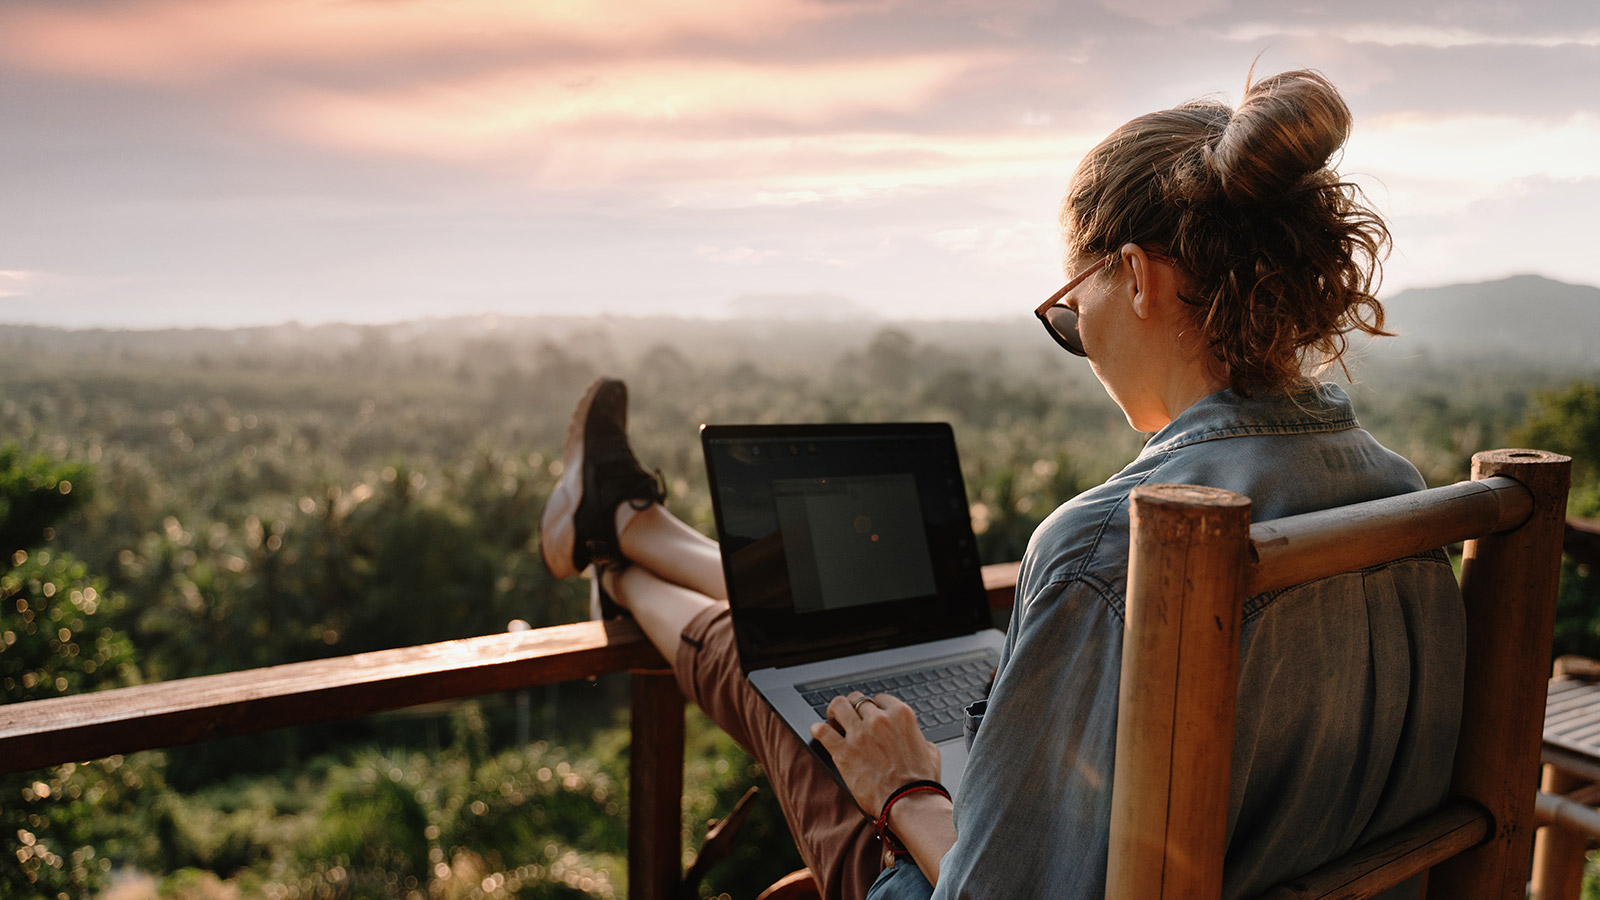 Young girl using a laptop at sunset